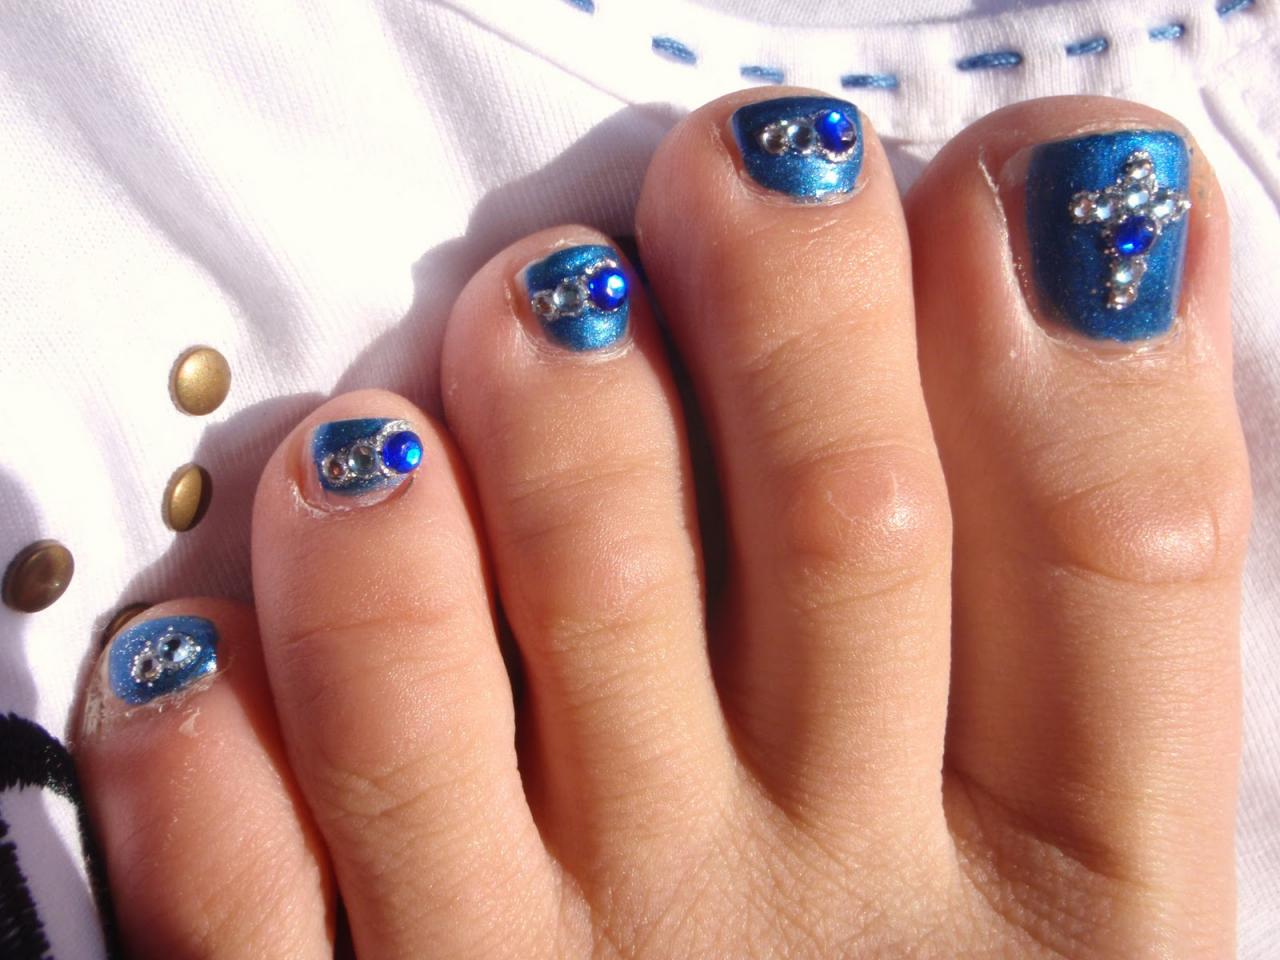 pedicures just got better with these 50 cute toe nail designs!